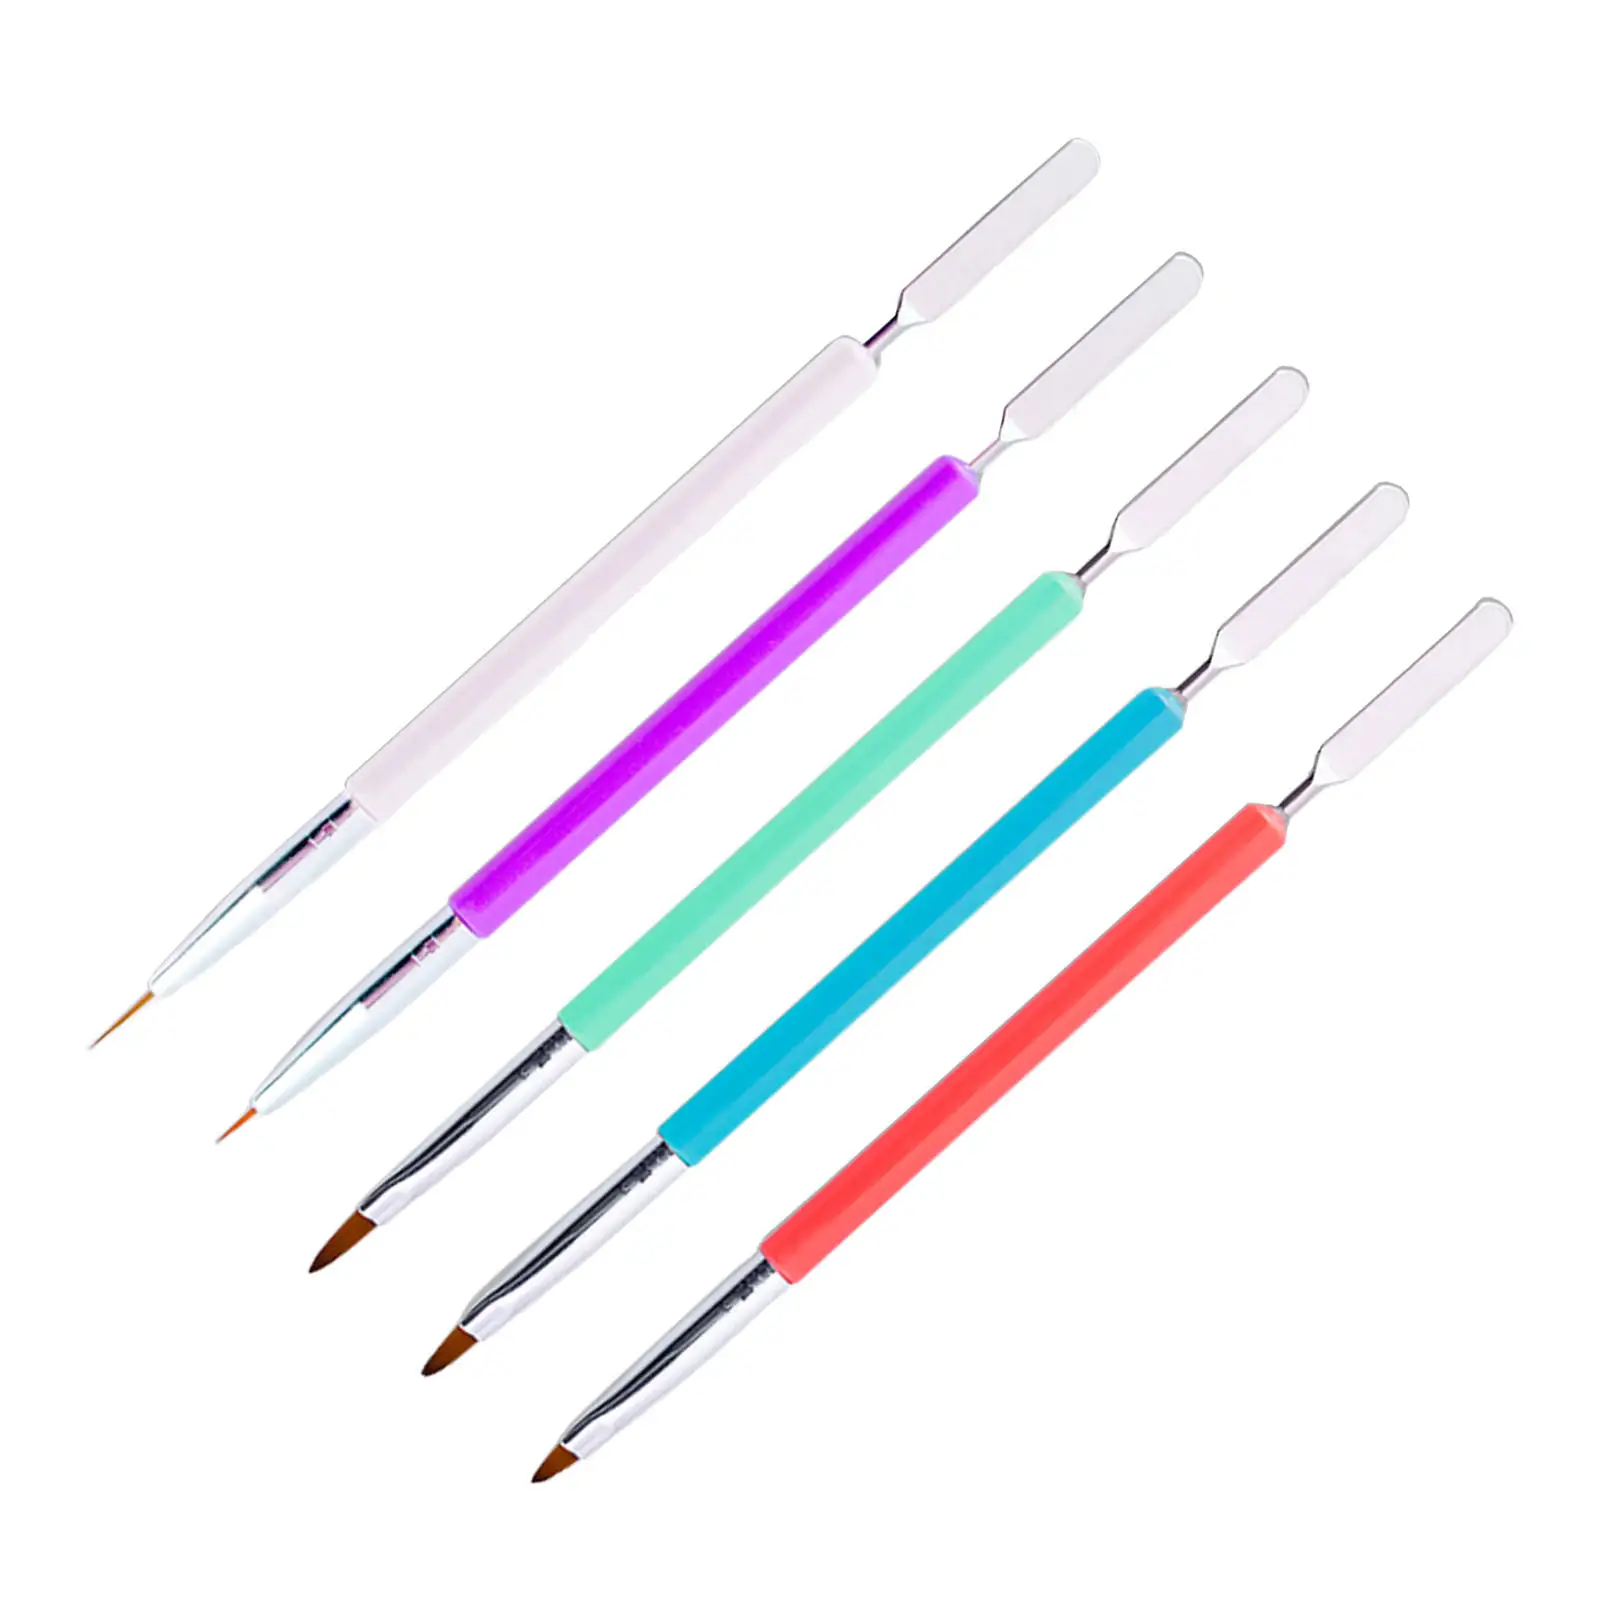 5x Nail Art Brush UV Gel Dual Head Spatula Stick Extension Drawing Pen for Salon Dotting Painting Home DIY Manicure Accessories